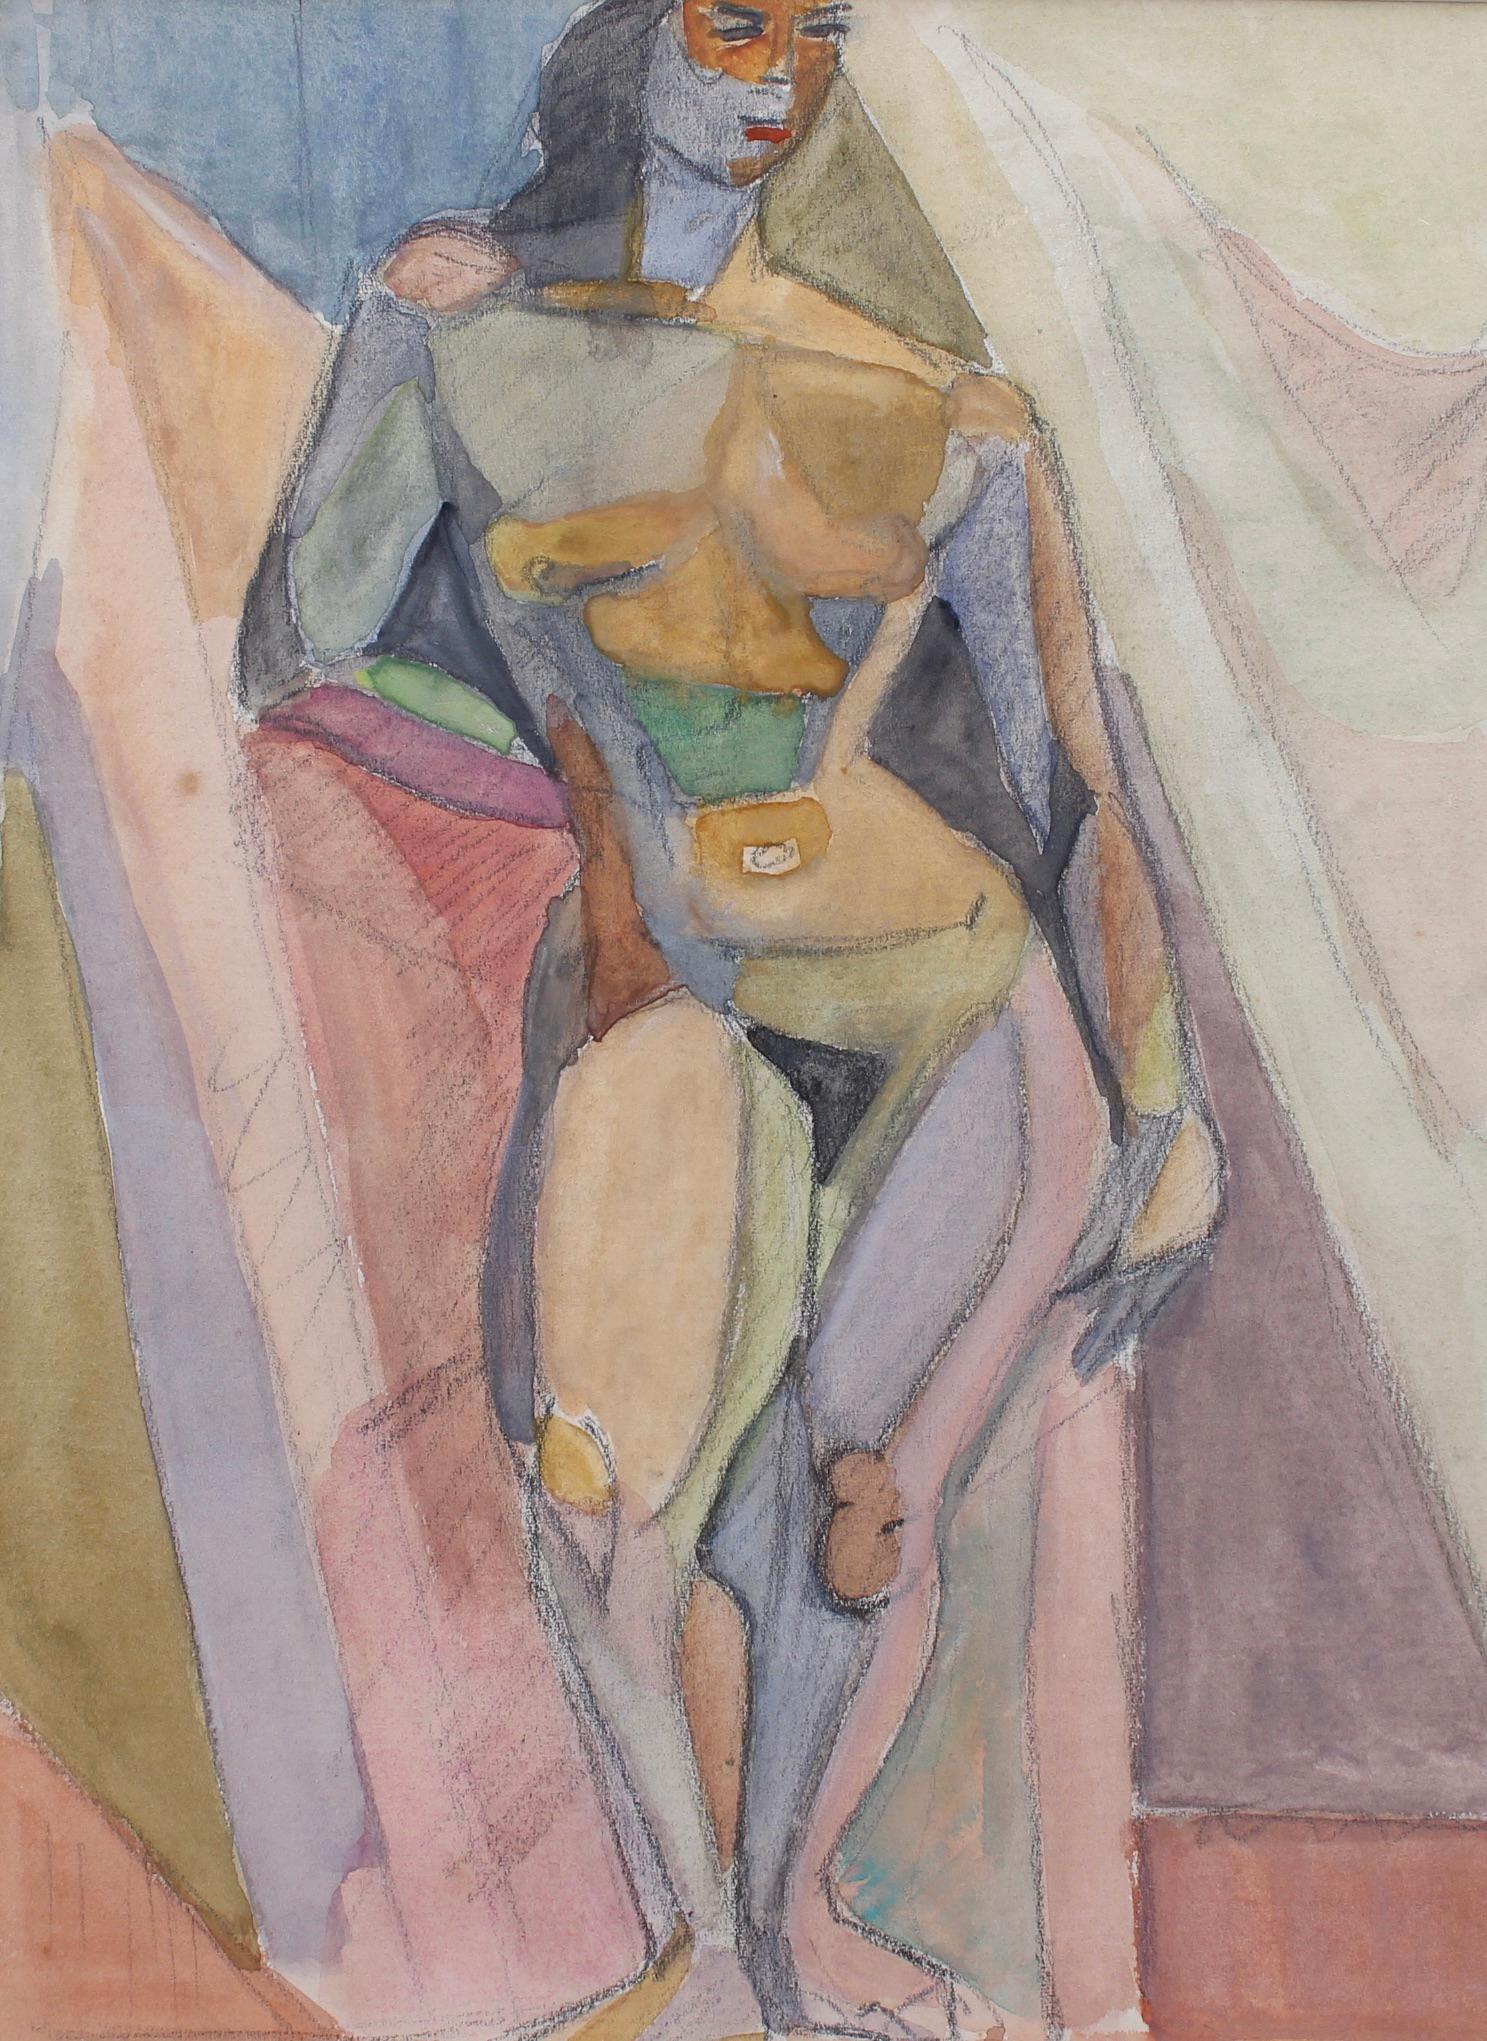 A cubist nude portrait of a reclining woman in model pose, in gouache and pencil on fine art paper (circa 1950s), by Eastern European artist Kosta Stojanovitch. This work is one in a series of several images. Here, an imposing woman stands